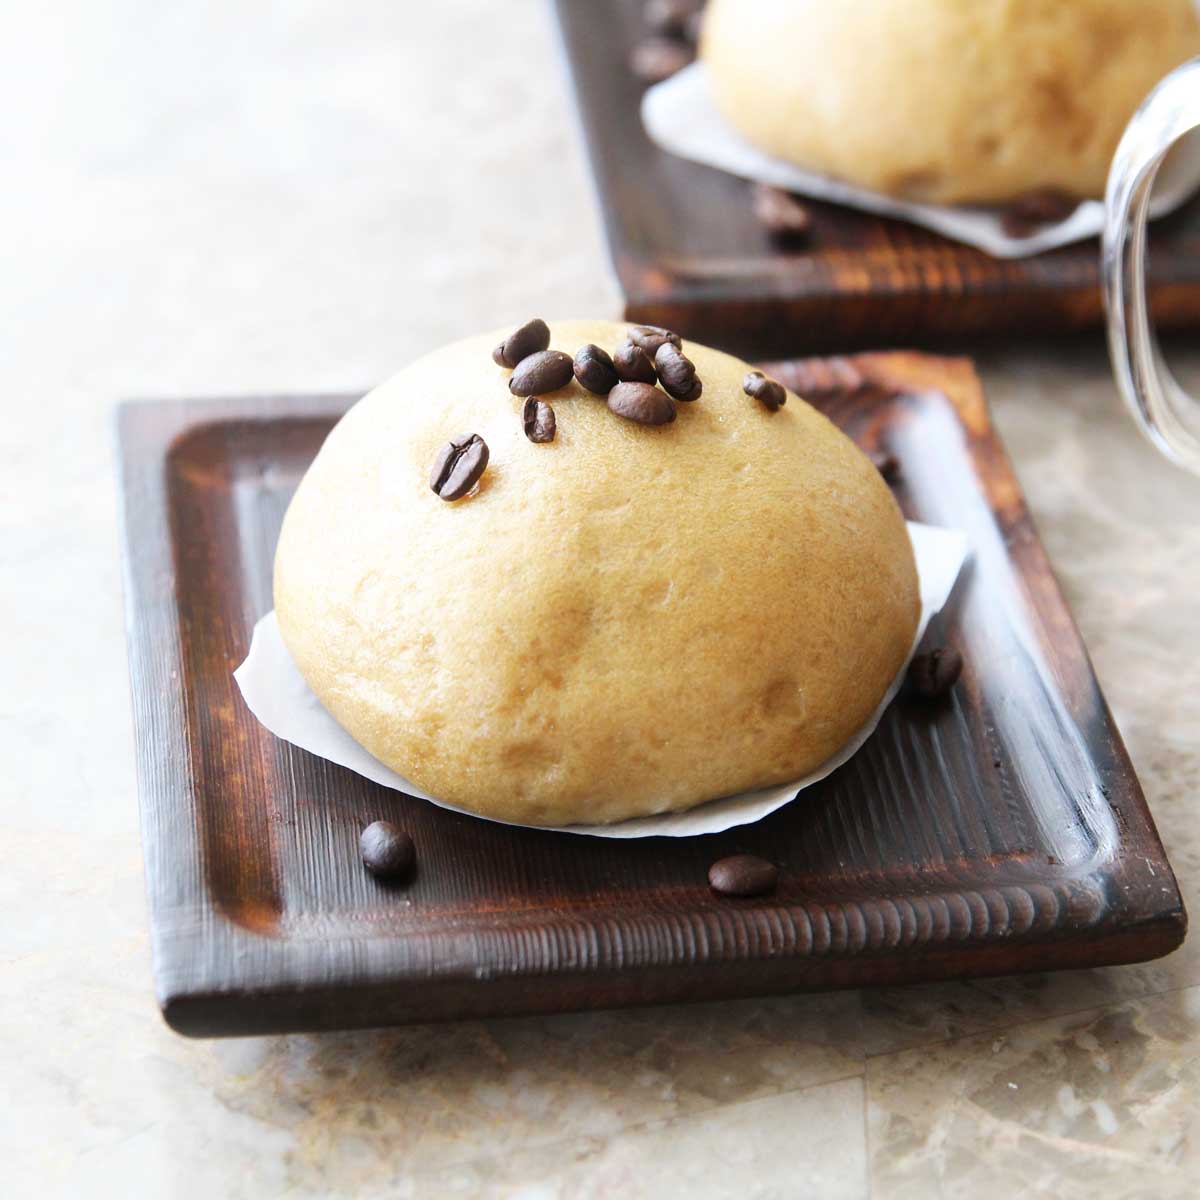 Easy Coffee & Almond Milk Steamed Buns with Creamy Coffee Paste Filling - Sweet Corn Flatbread